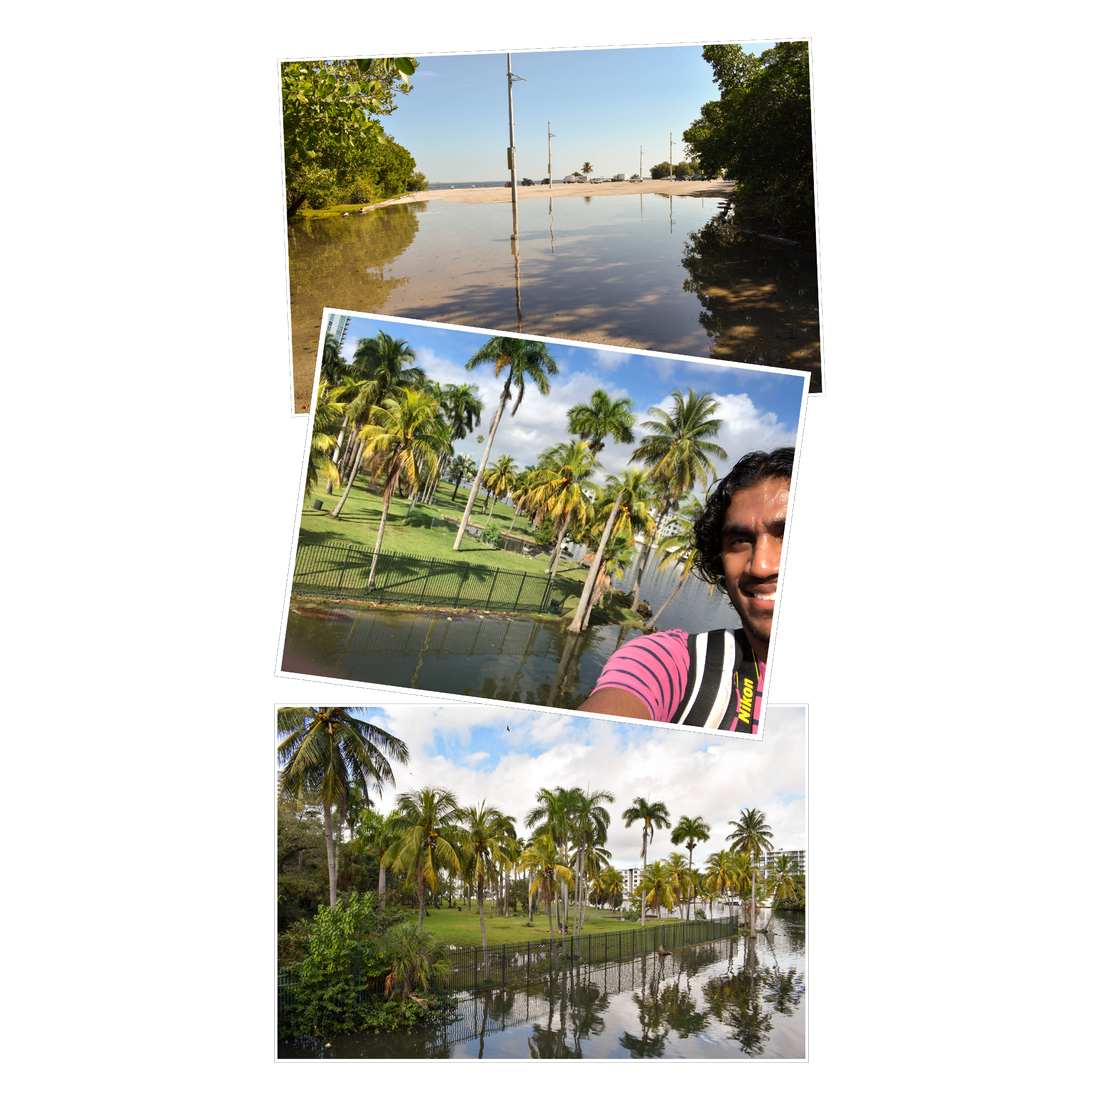 A collage of three images showing sea water flooding a parking lot and a park with palm trees.